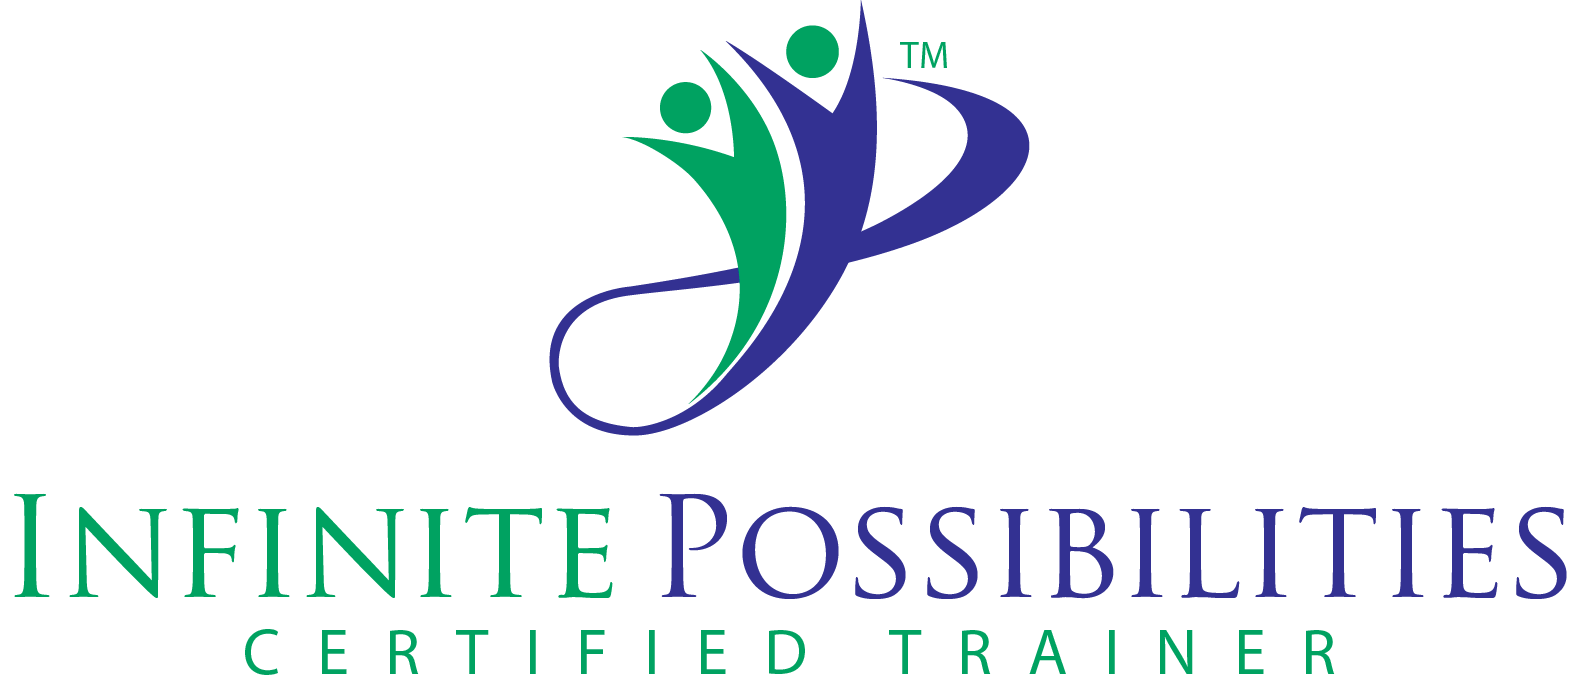 Infinite Possibilities Certified Trainer - Donna-Marie